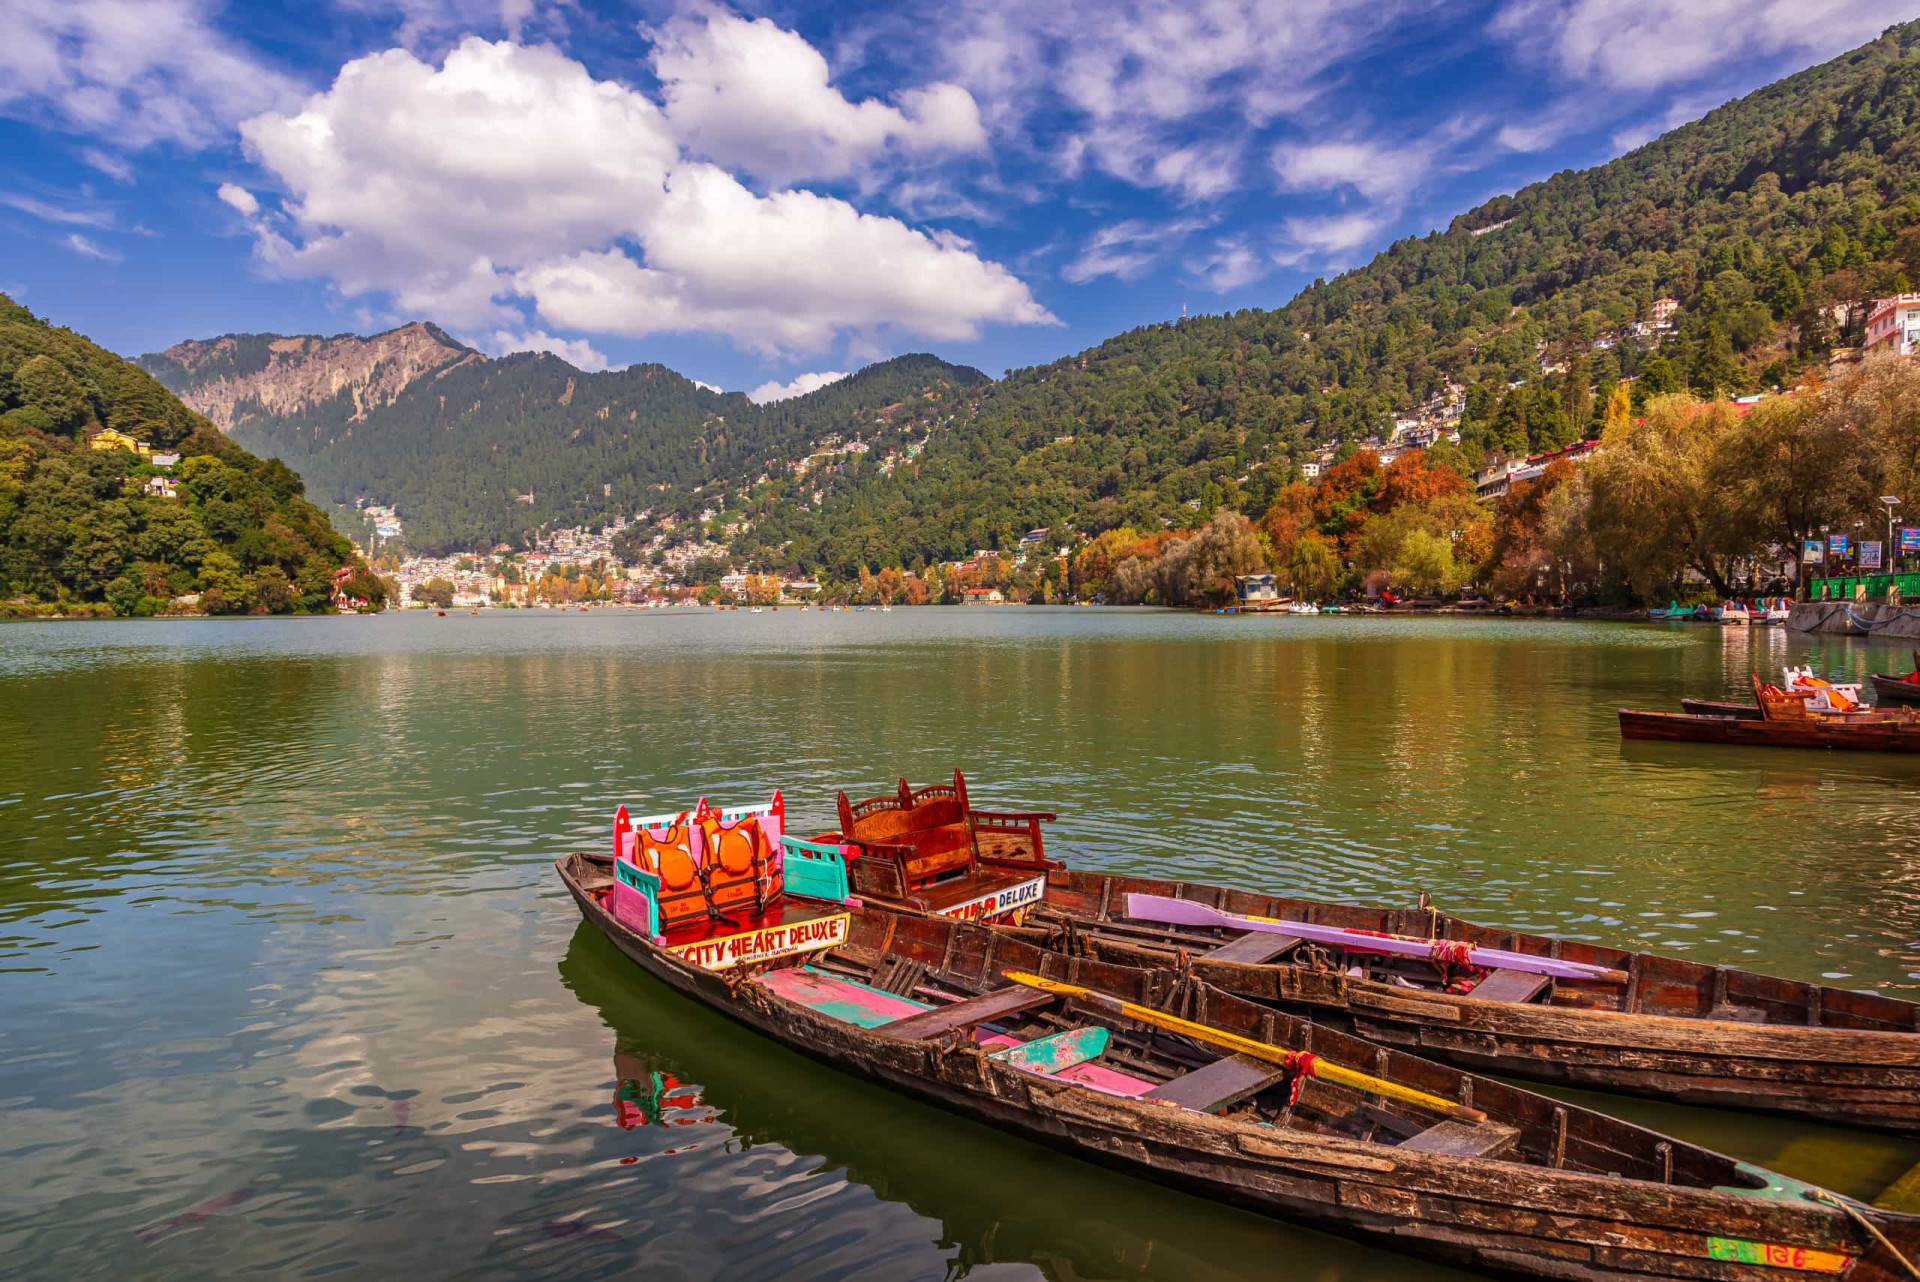 <p>The charming picture-perfect Nainital hill station in Uttarakhand state is celebrated for its scenic <a href="https://www.starsinsider.com/travel/182427/the-most-spectacular-lakes-on-earth" rel="noopener">lake</a>, which nestles in the Kumaon foothills nearly 2,000 m (6,561 ft) above sea level. Nainital is surrounded by mountains, the highest being Naina, at 2,615 m (8,579 ft), and the sense of the remote is tangible. It's probably why this hill station ranks among the most visited in northern India.</p><p>You may also like:<a href="https://www.starsinsider.com/n/252211?utm_source=msn.com&utm_medium=display&utm_campaign=referral_description&utm_content=470081v2en-en"> Who has the most vandalized star on the Hollywood Walk of Fame?</a></p>